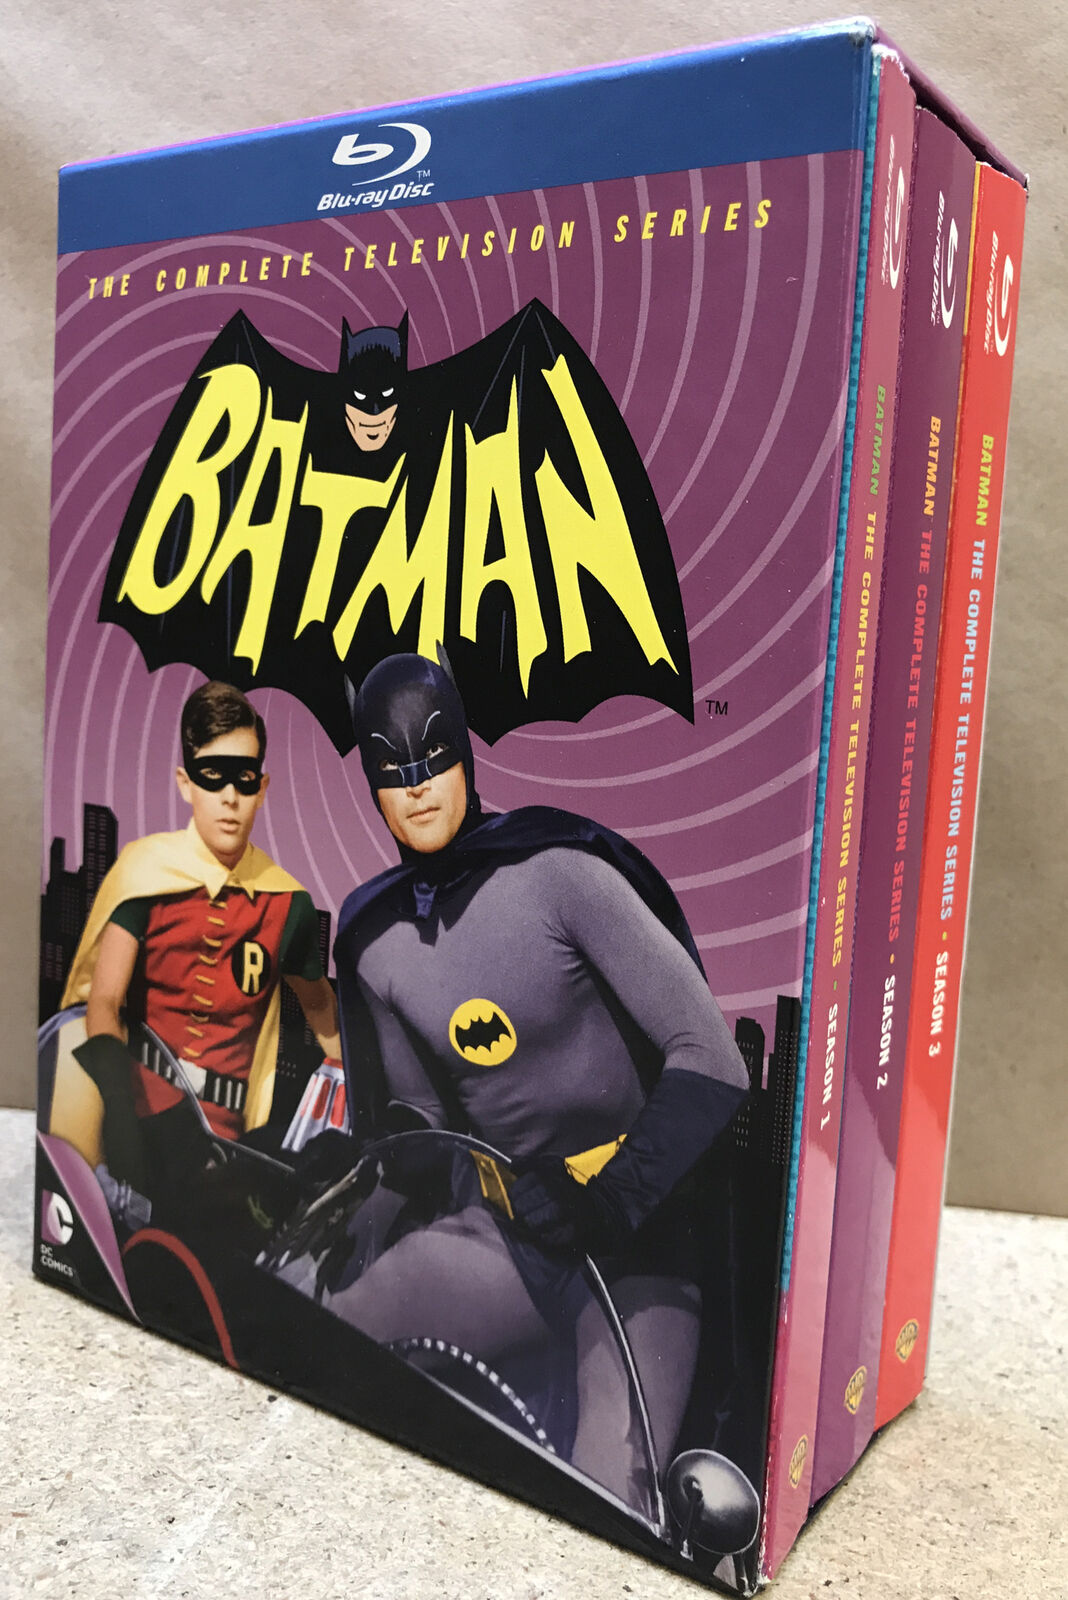 Batman: The Complete Television Series (Blu-ray, 1966)